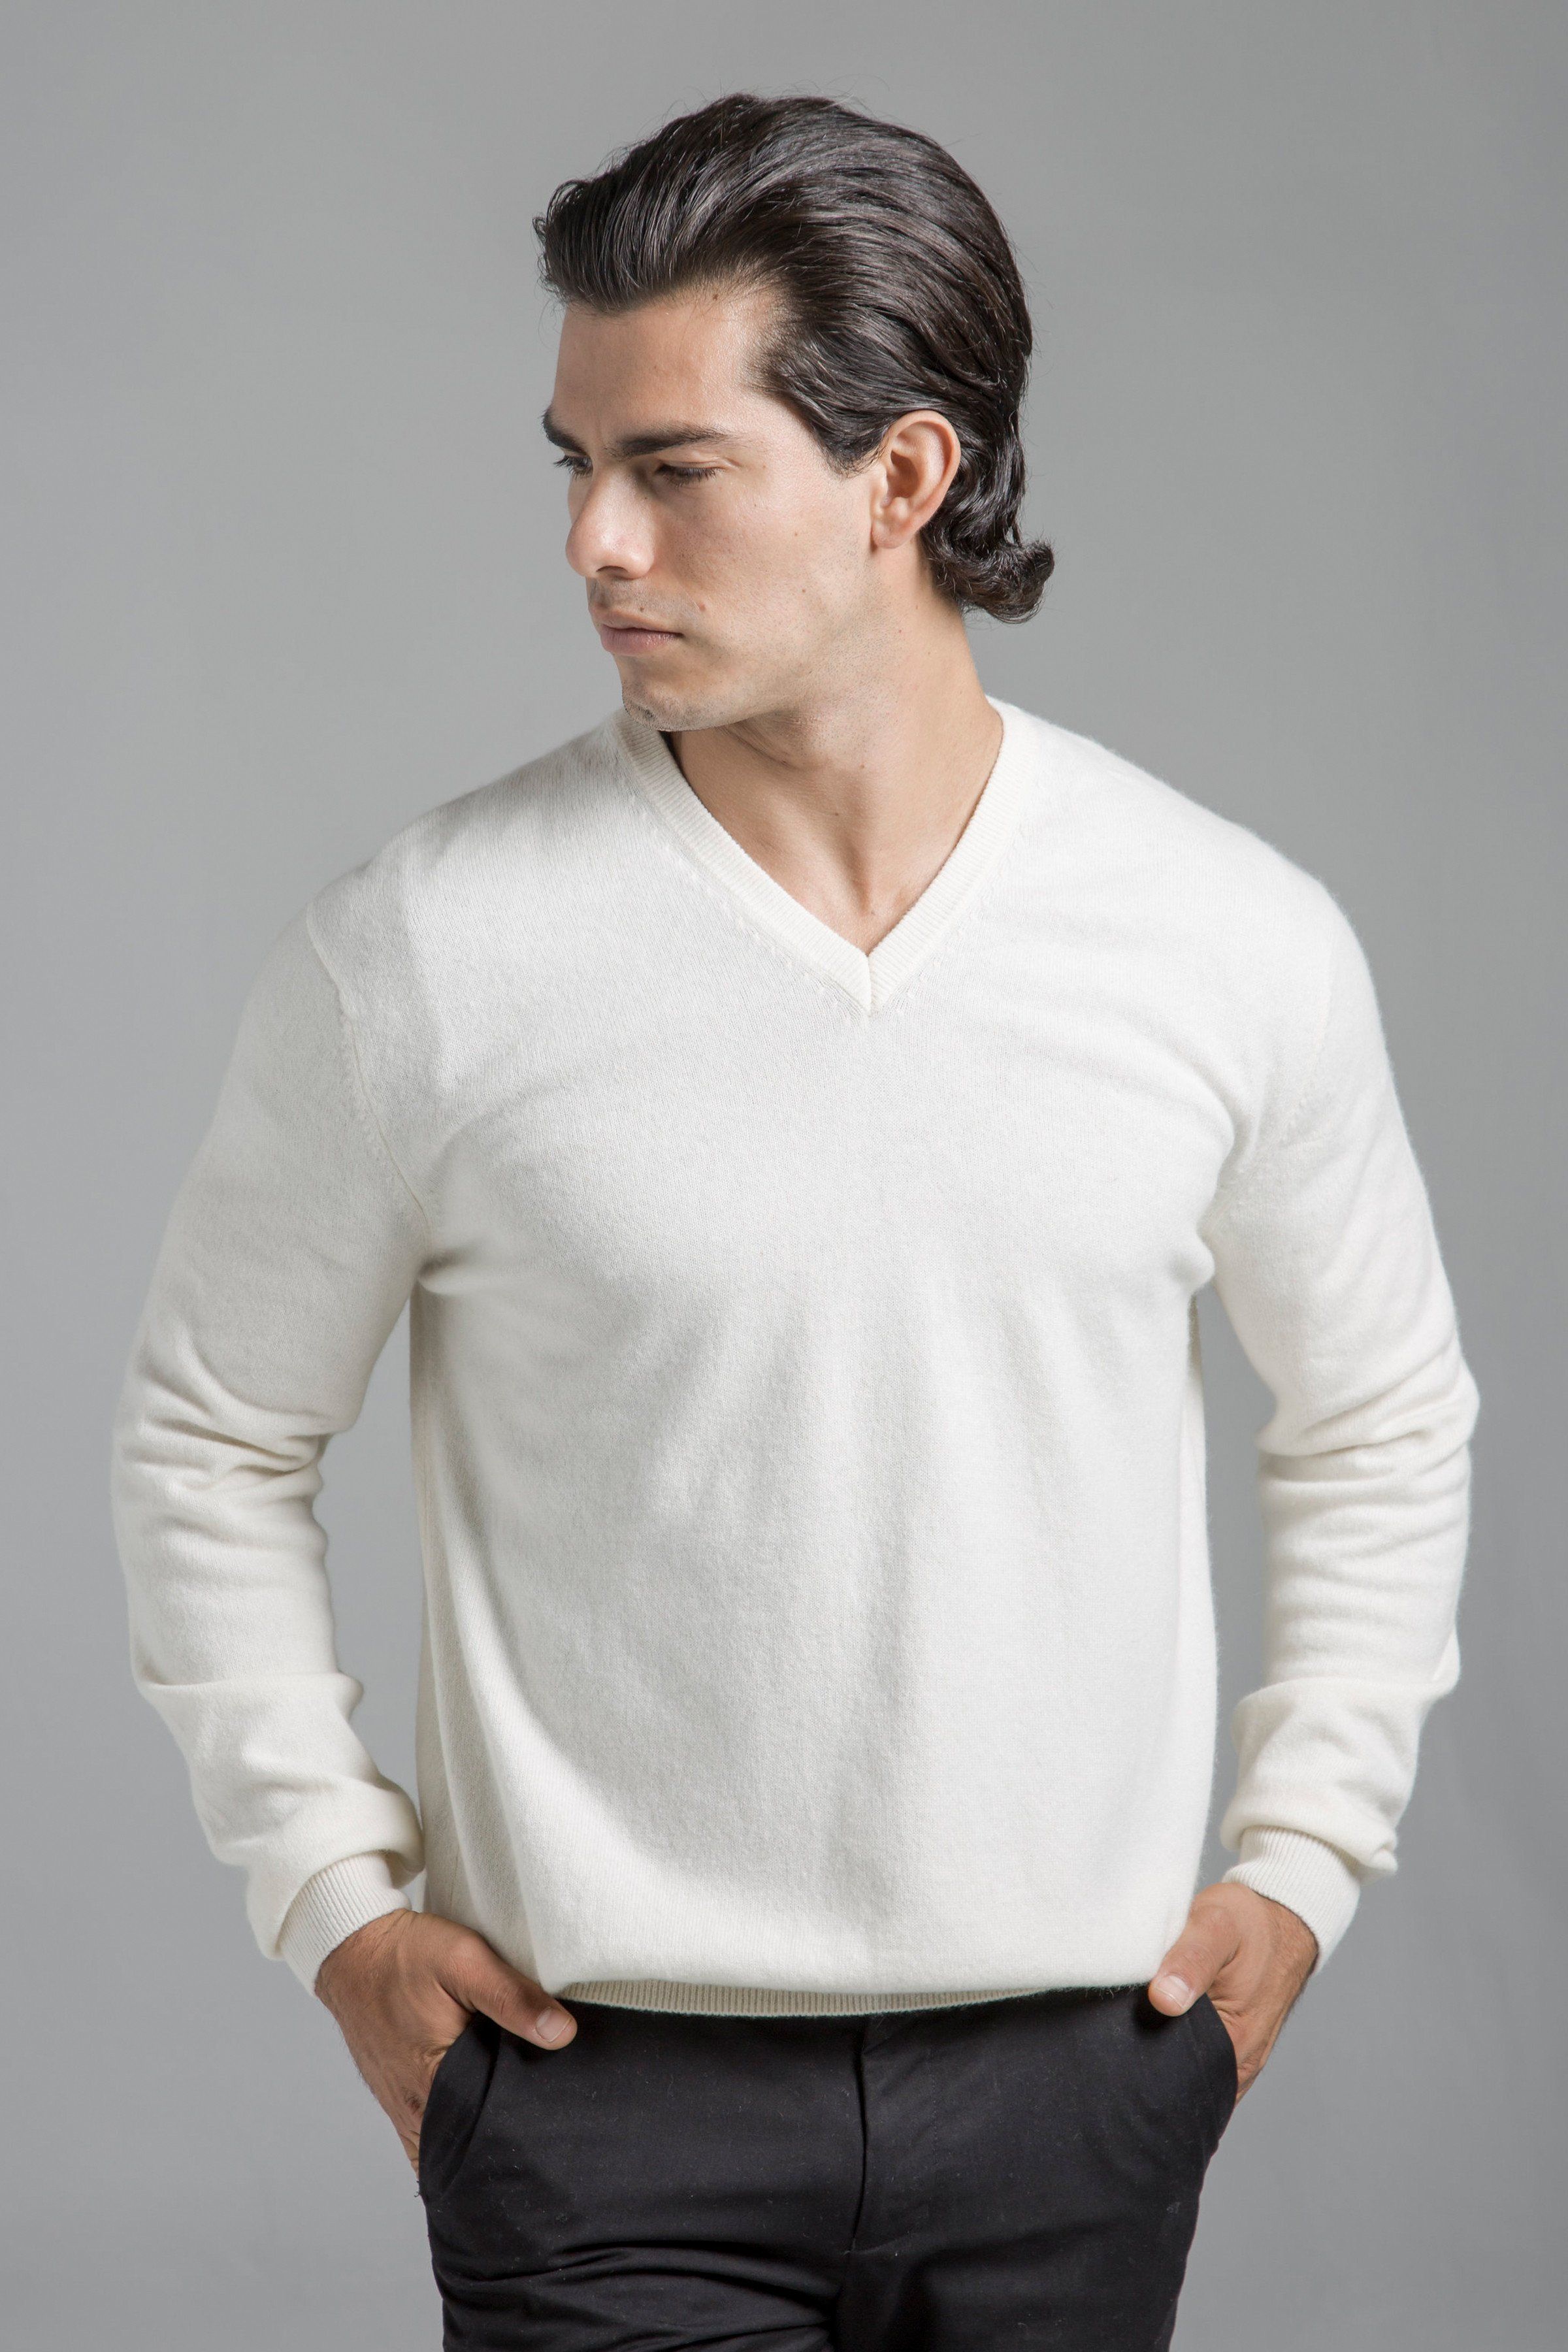 Men’s Classic Cashmere V-Neck Sweater by Pine Cashmere